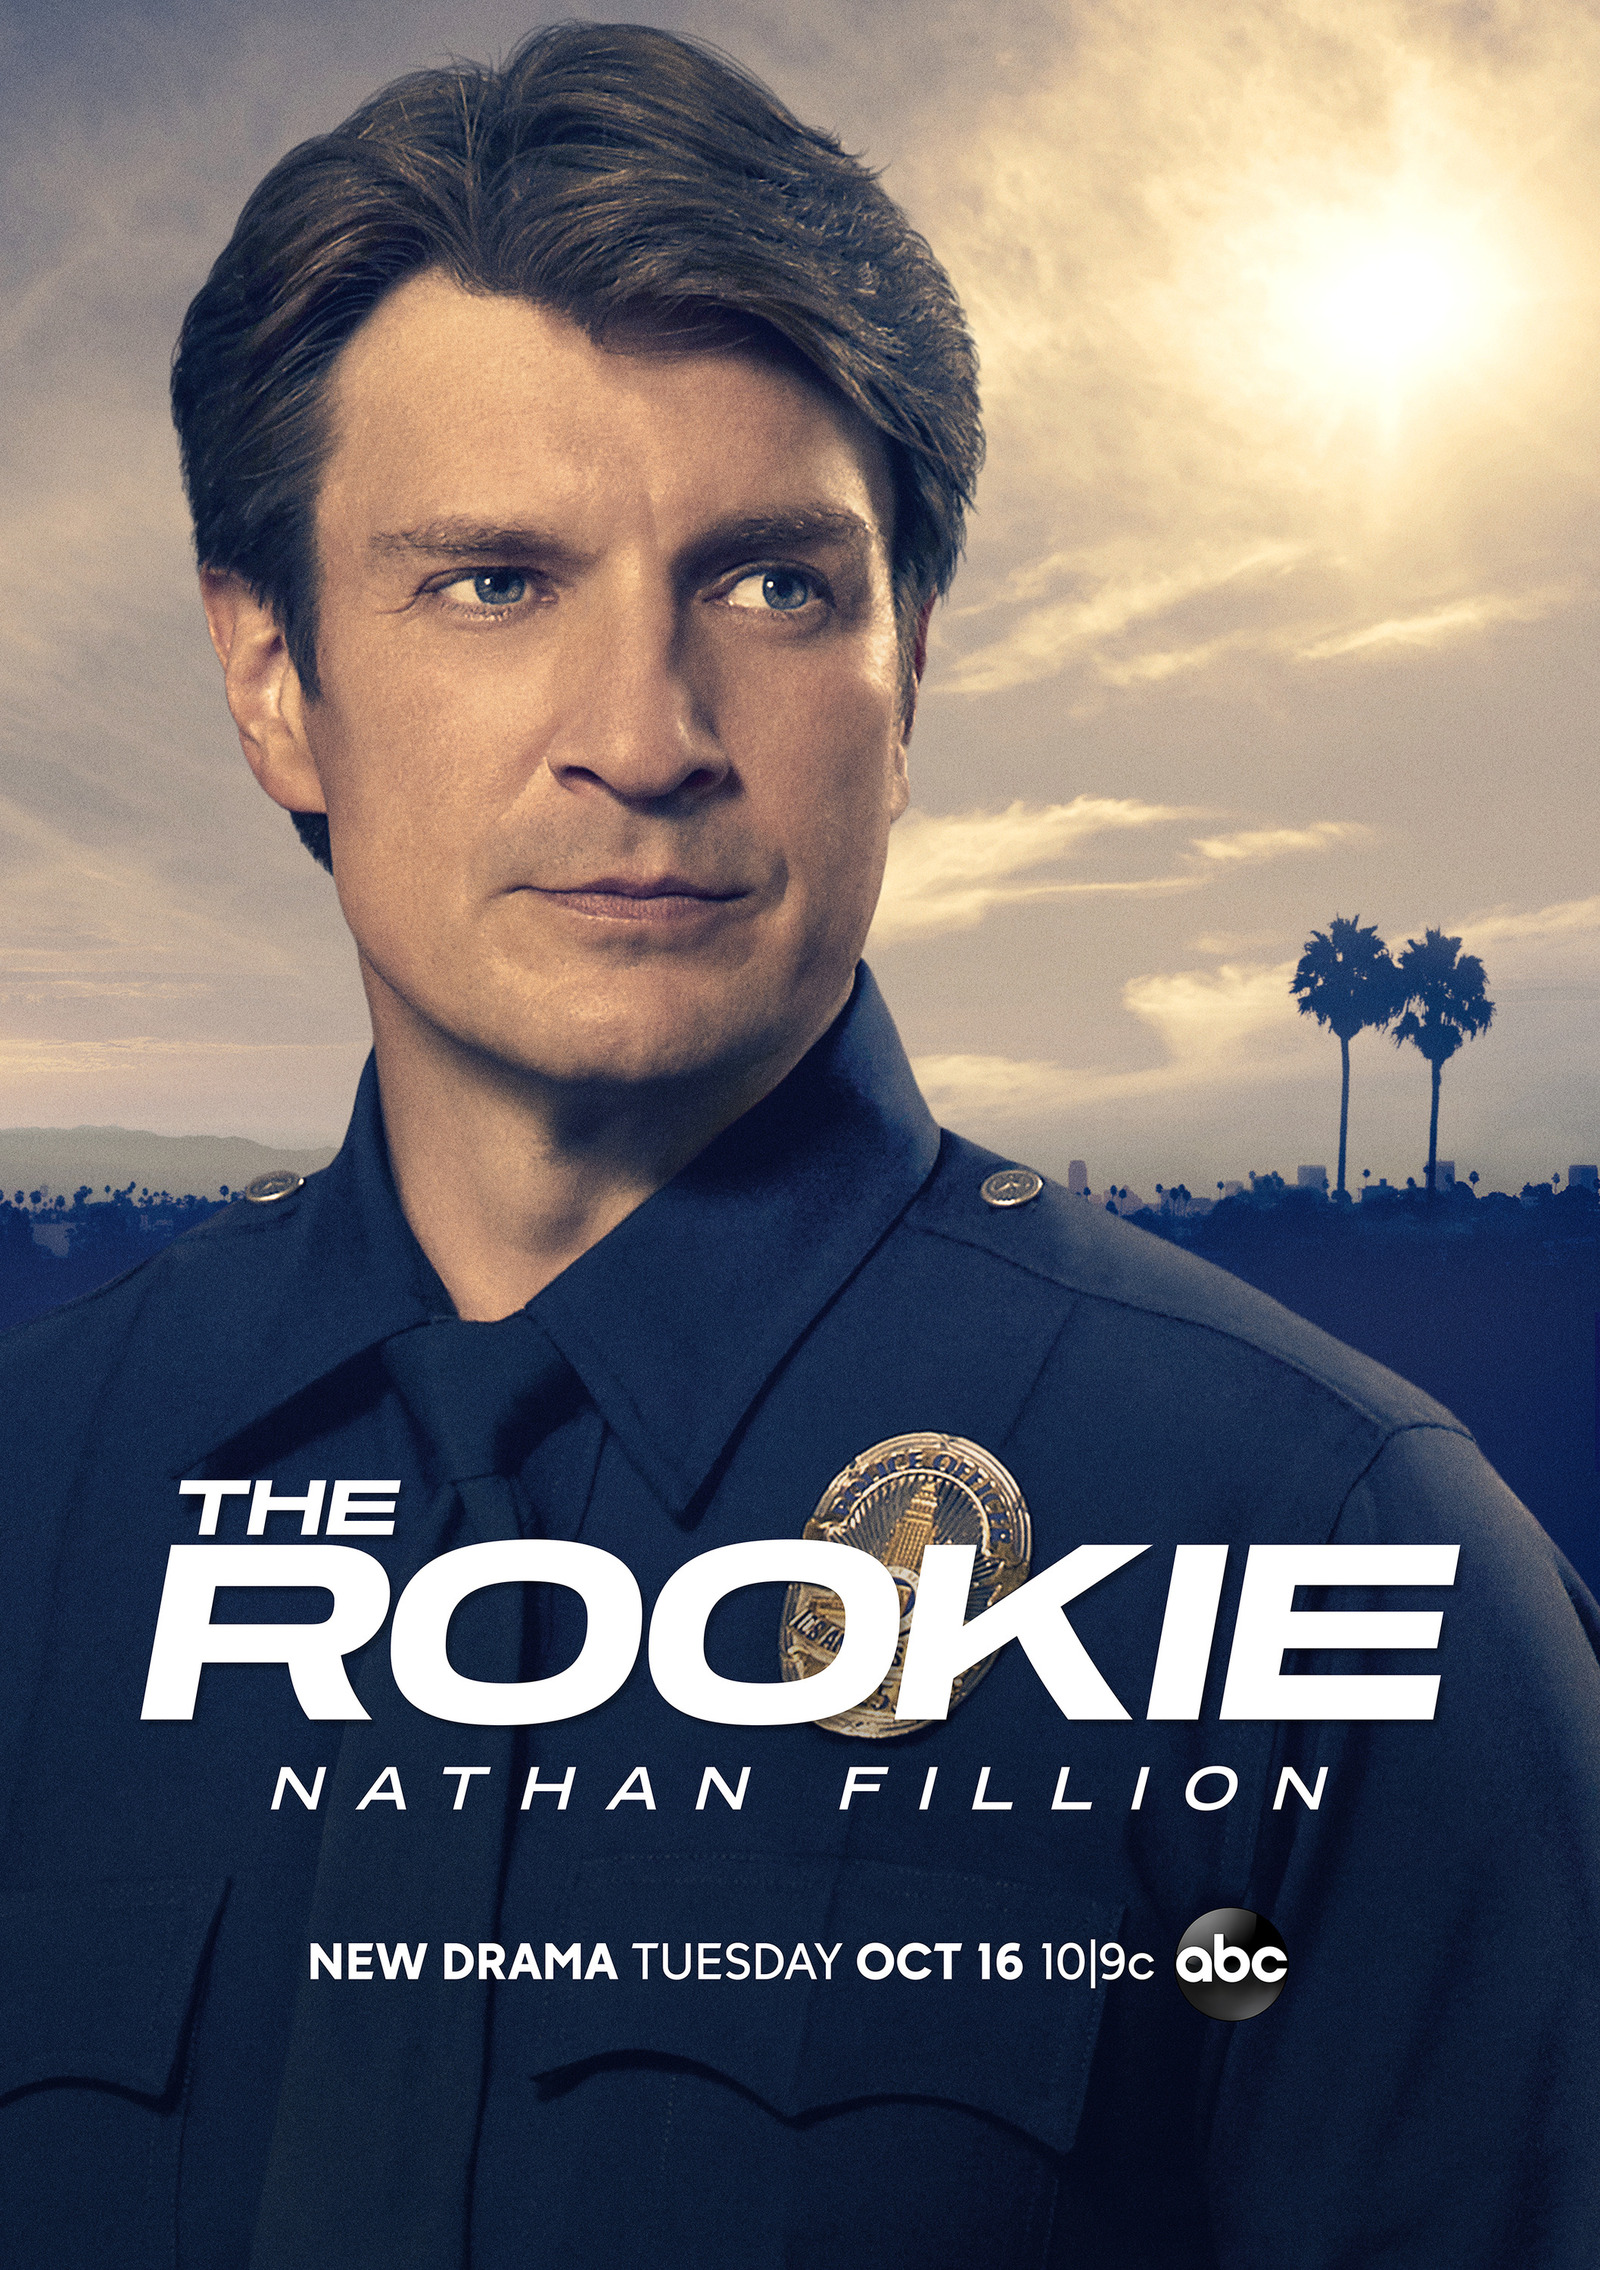 The Rookie - Serials, The Rookie, Nathan Fillion, Police, Recruits